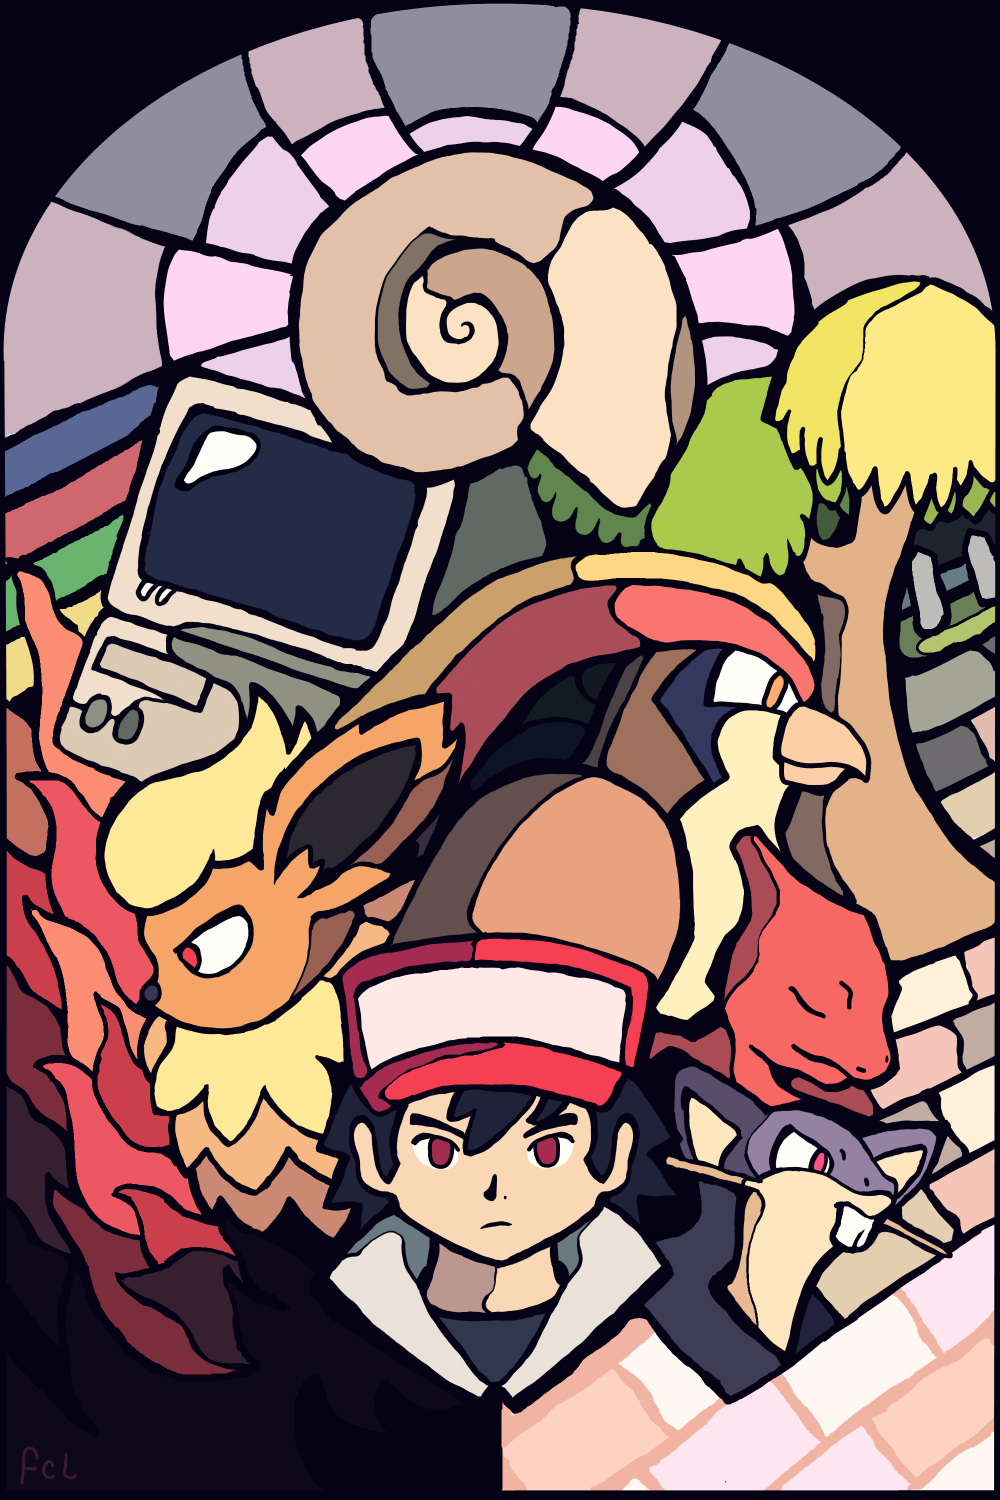 twitch_plays_pokemon___red_s_encounters__by_flynncl-d774421.png